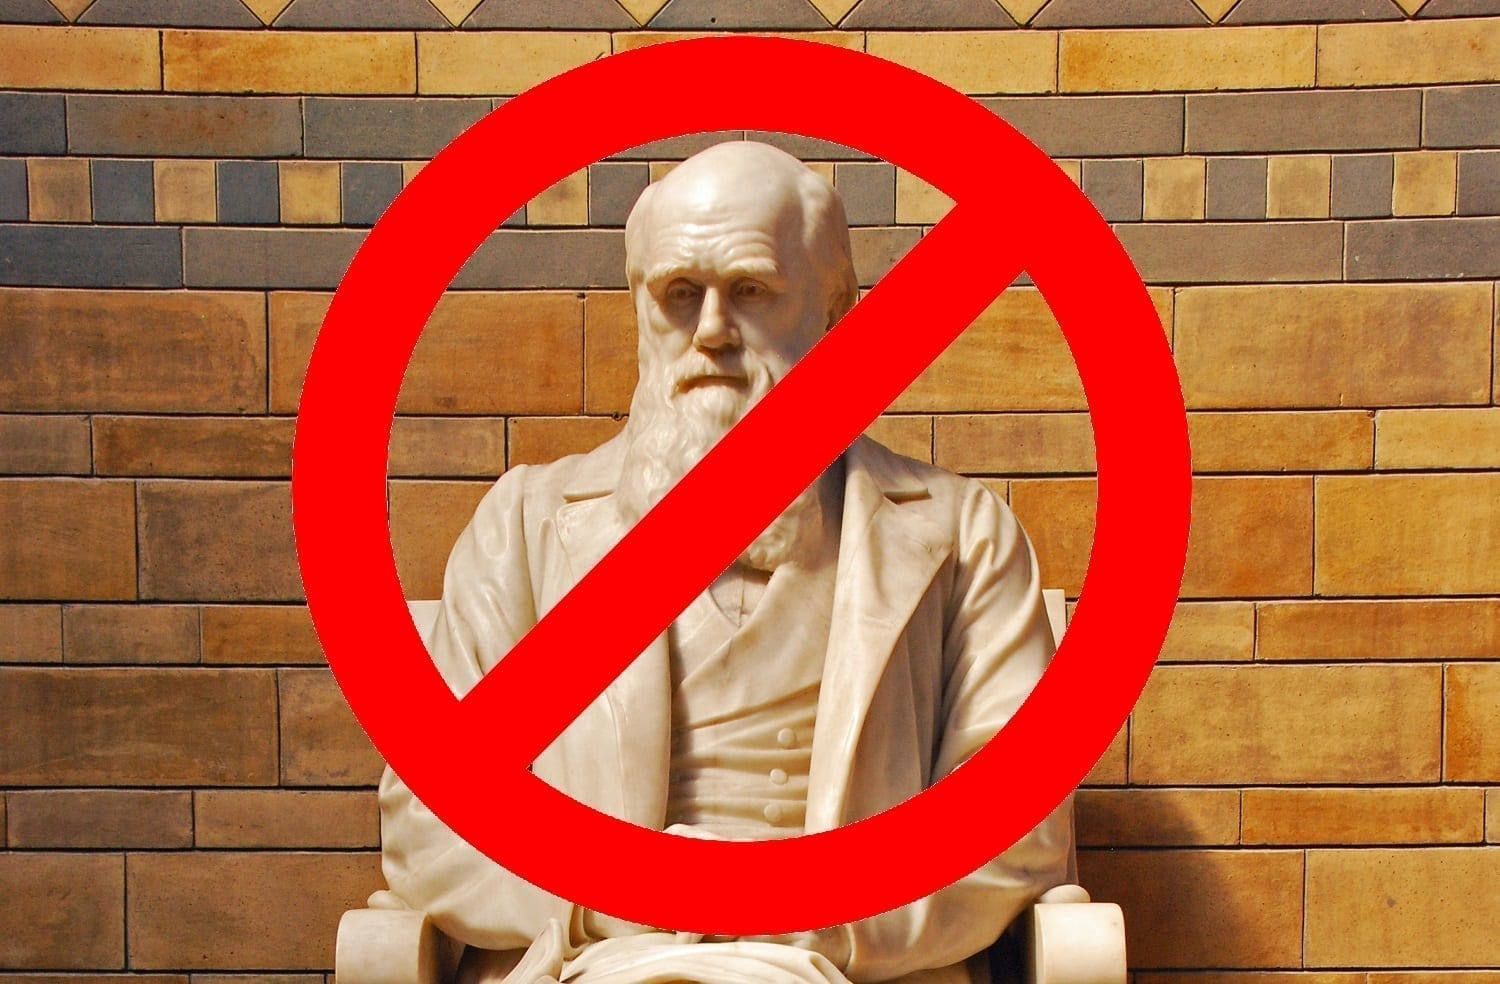 Darwin Statue with a Not Allowed Circle over him